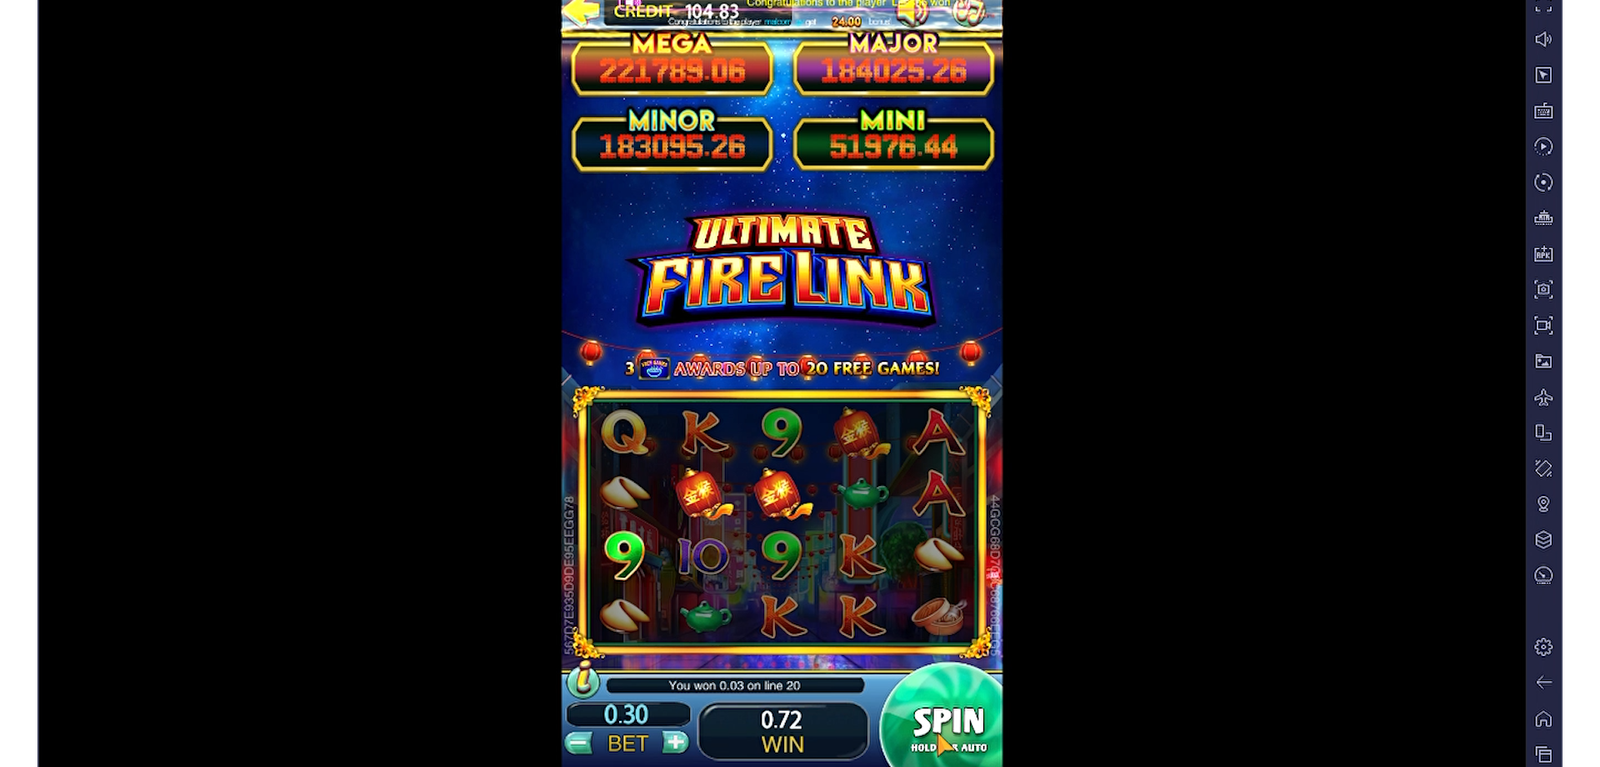 Ultimate Fire Link China Street 1